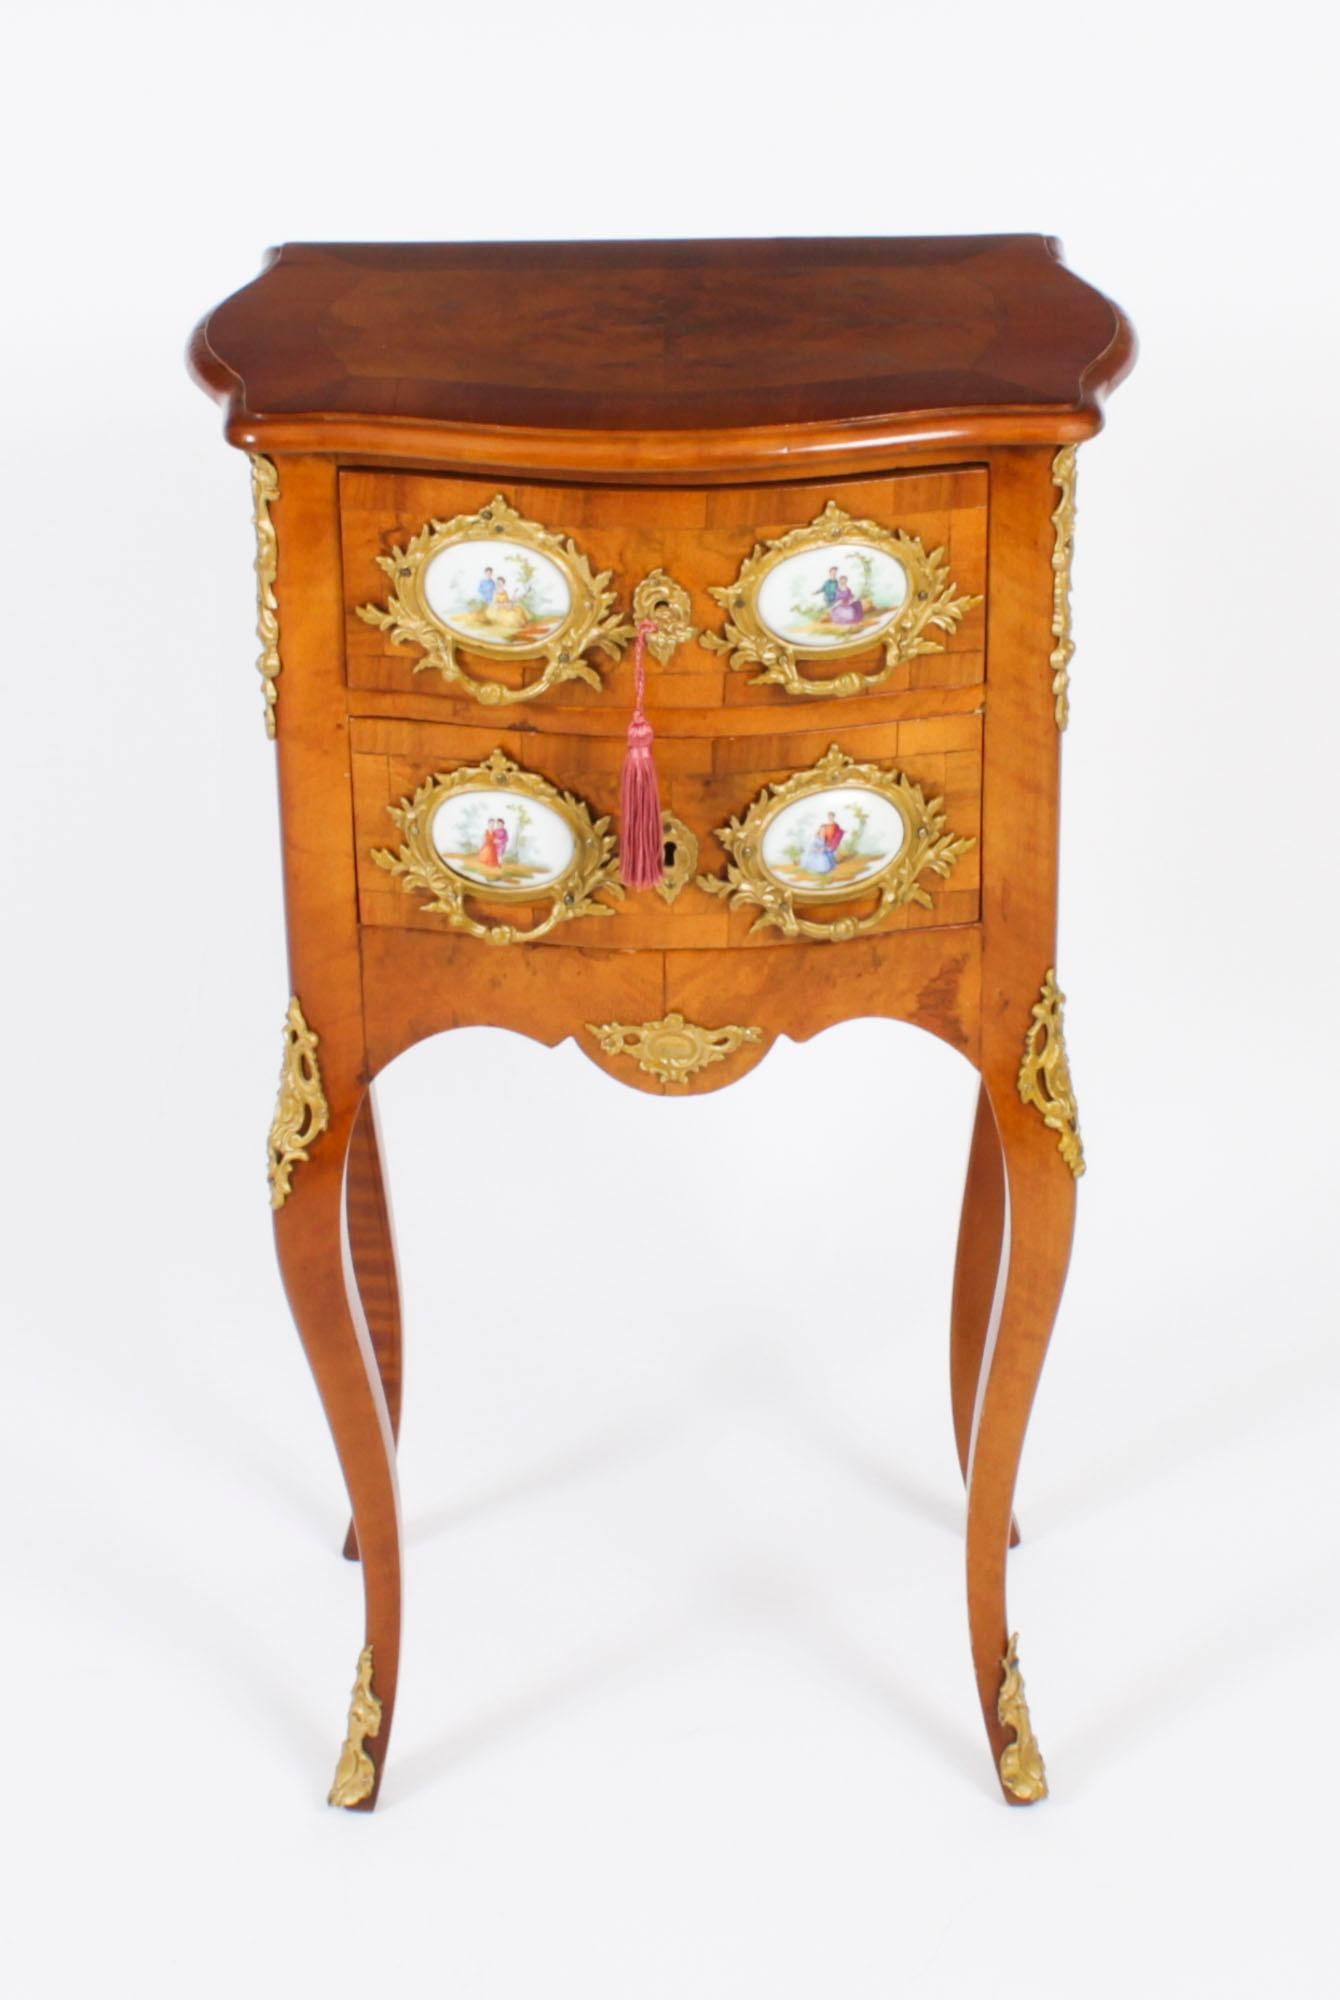 A stunning antique Louis Revival small serpentine fronted burr walnut two drawer chest, Circa 1890 in date.
Crafted from the most beautiful burr walnut with crossbanded decoration and ormolu mounts. It has stunning ornate foliate ormolu handles with